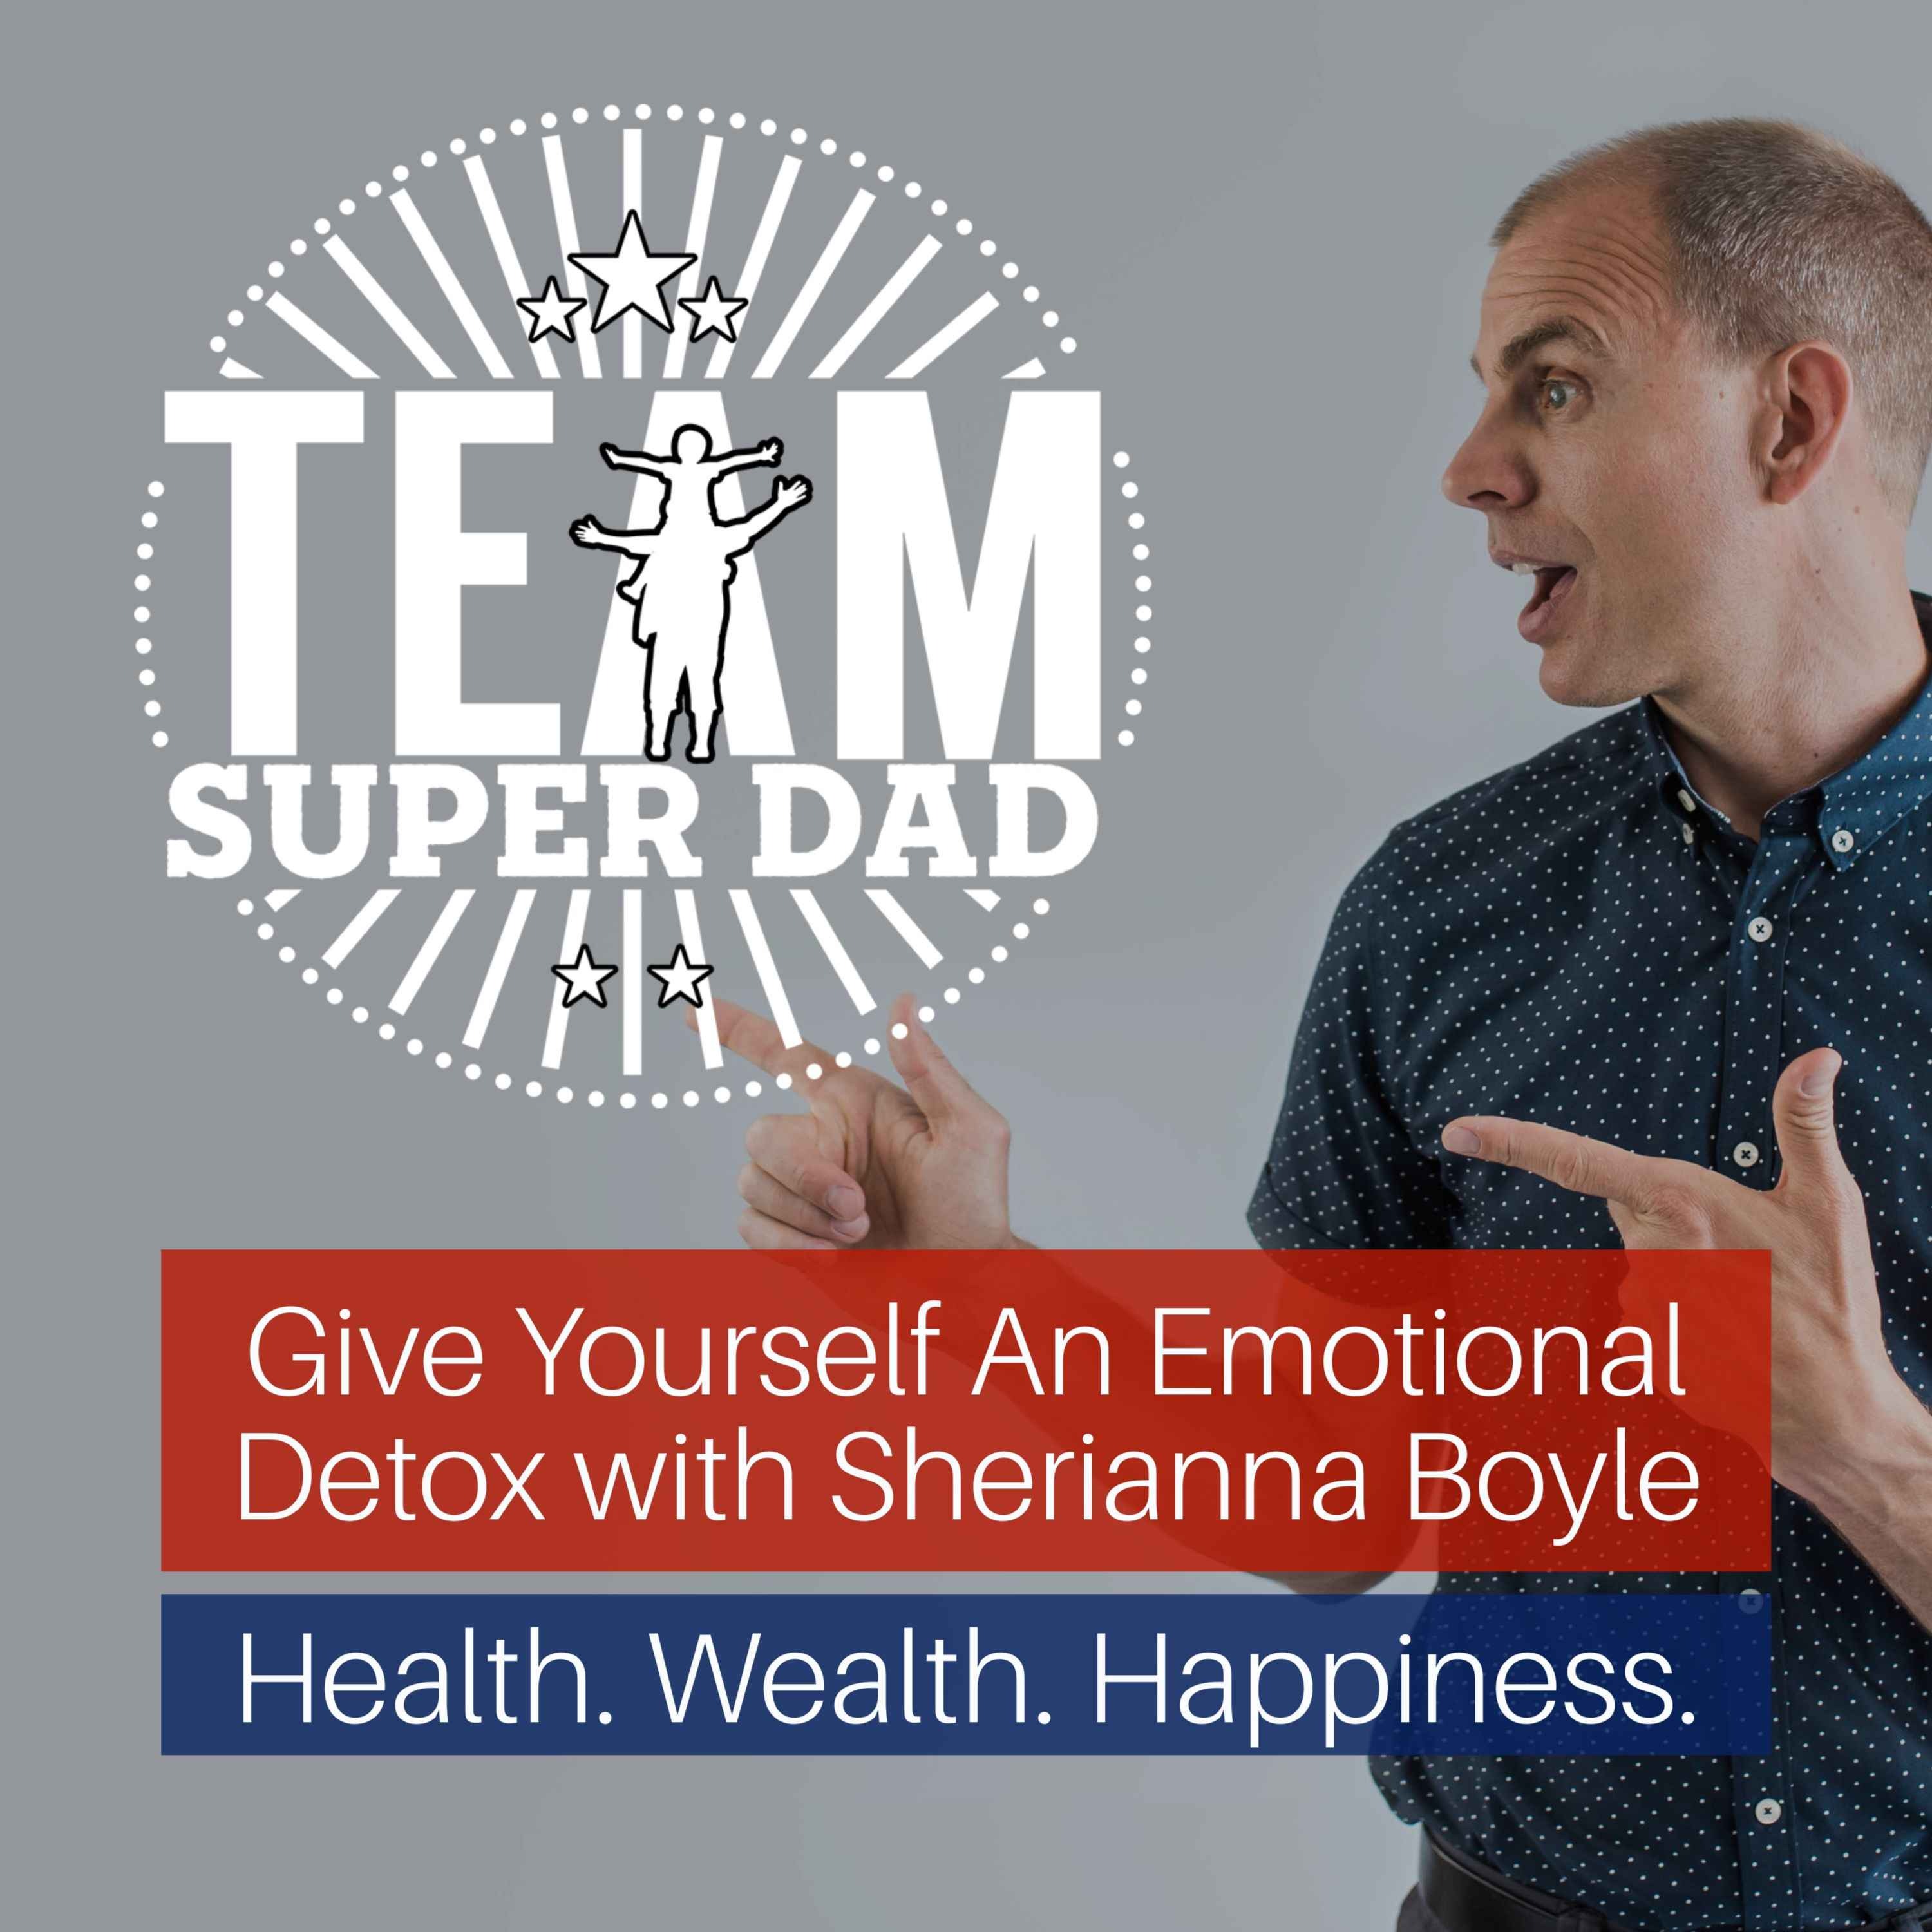 How To Give Yourself An Emotional Detox with Sherianna Boyle